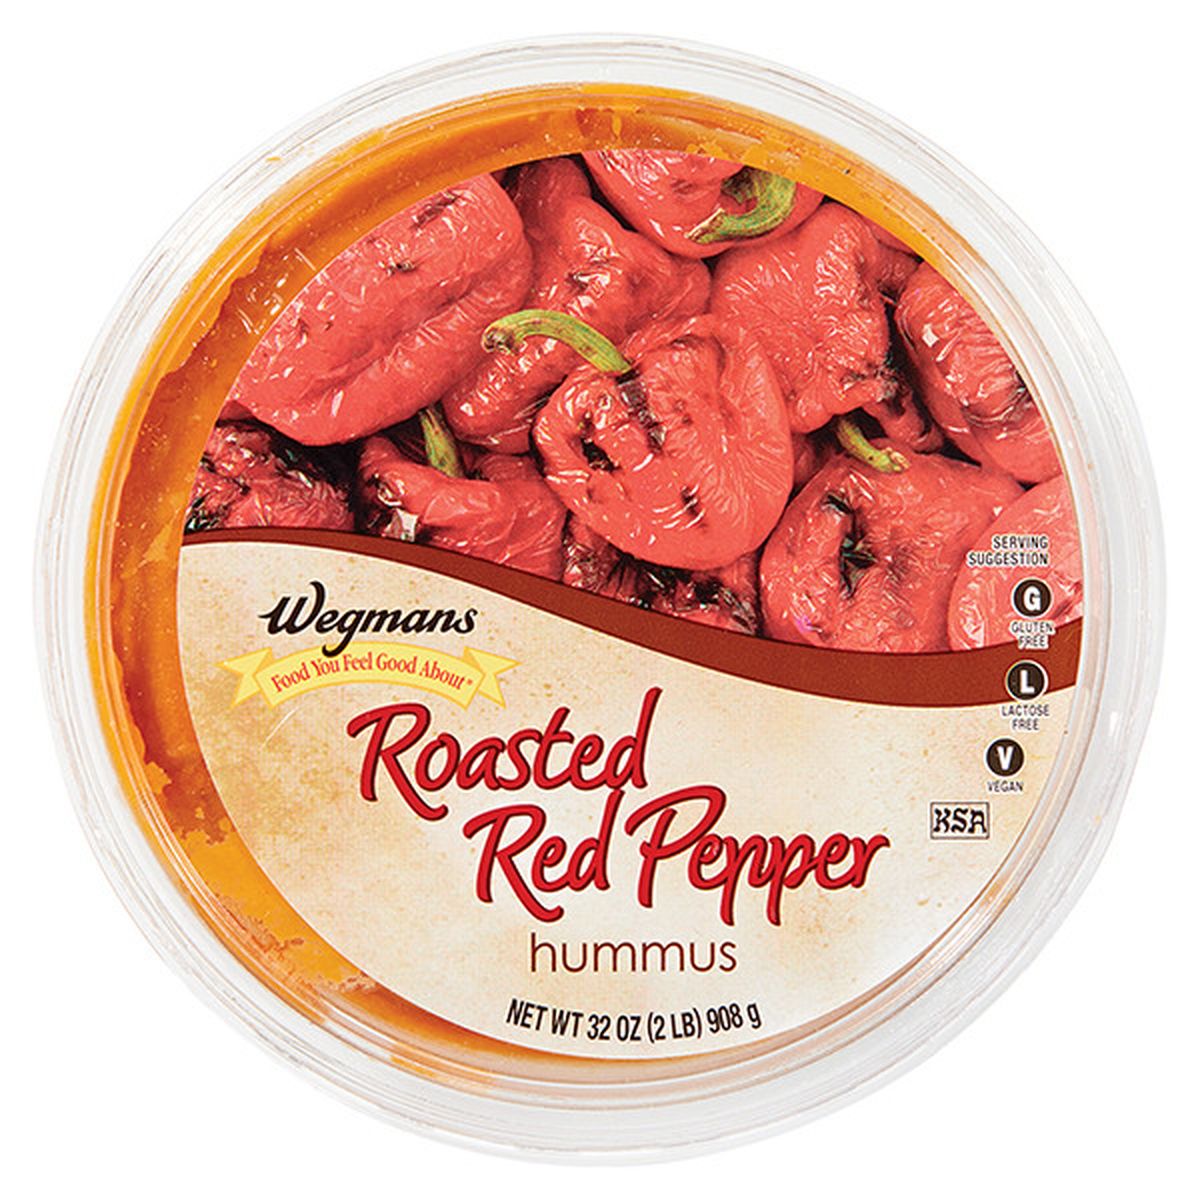 Calories in Wegmans Roasted Red Pepper Hummus, FAMILY PACK